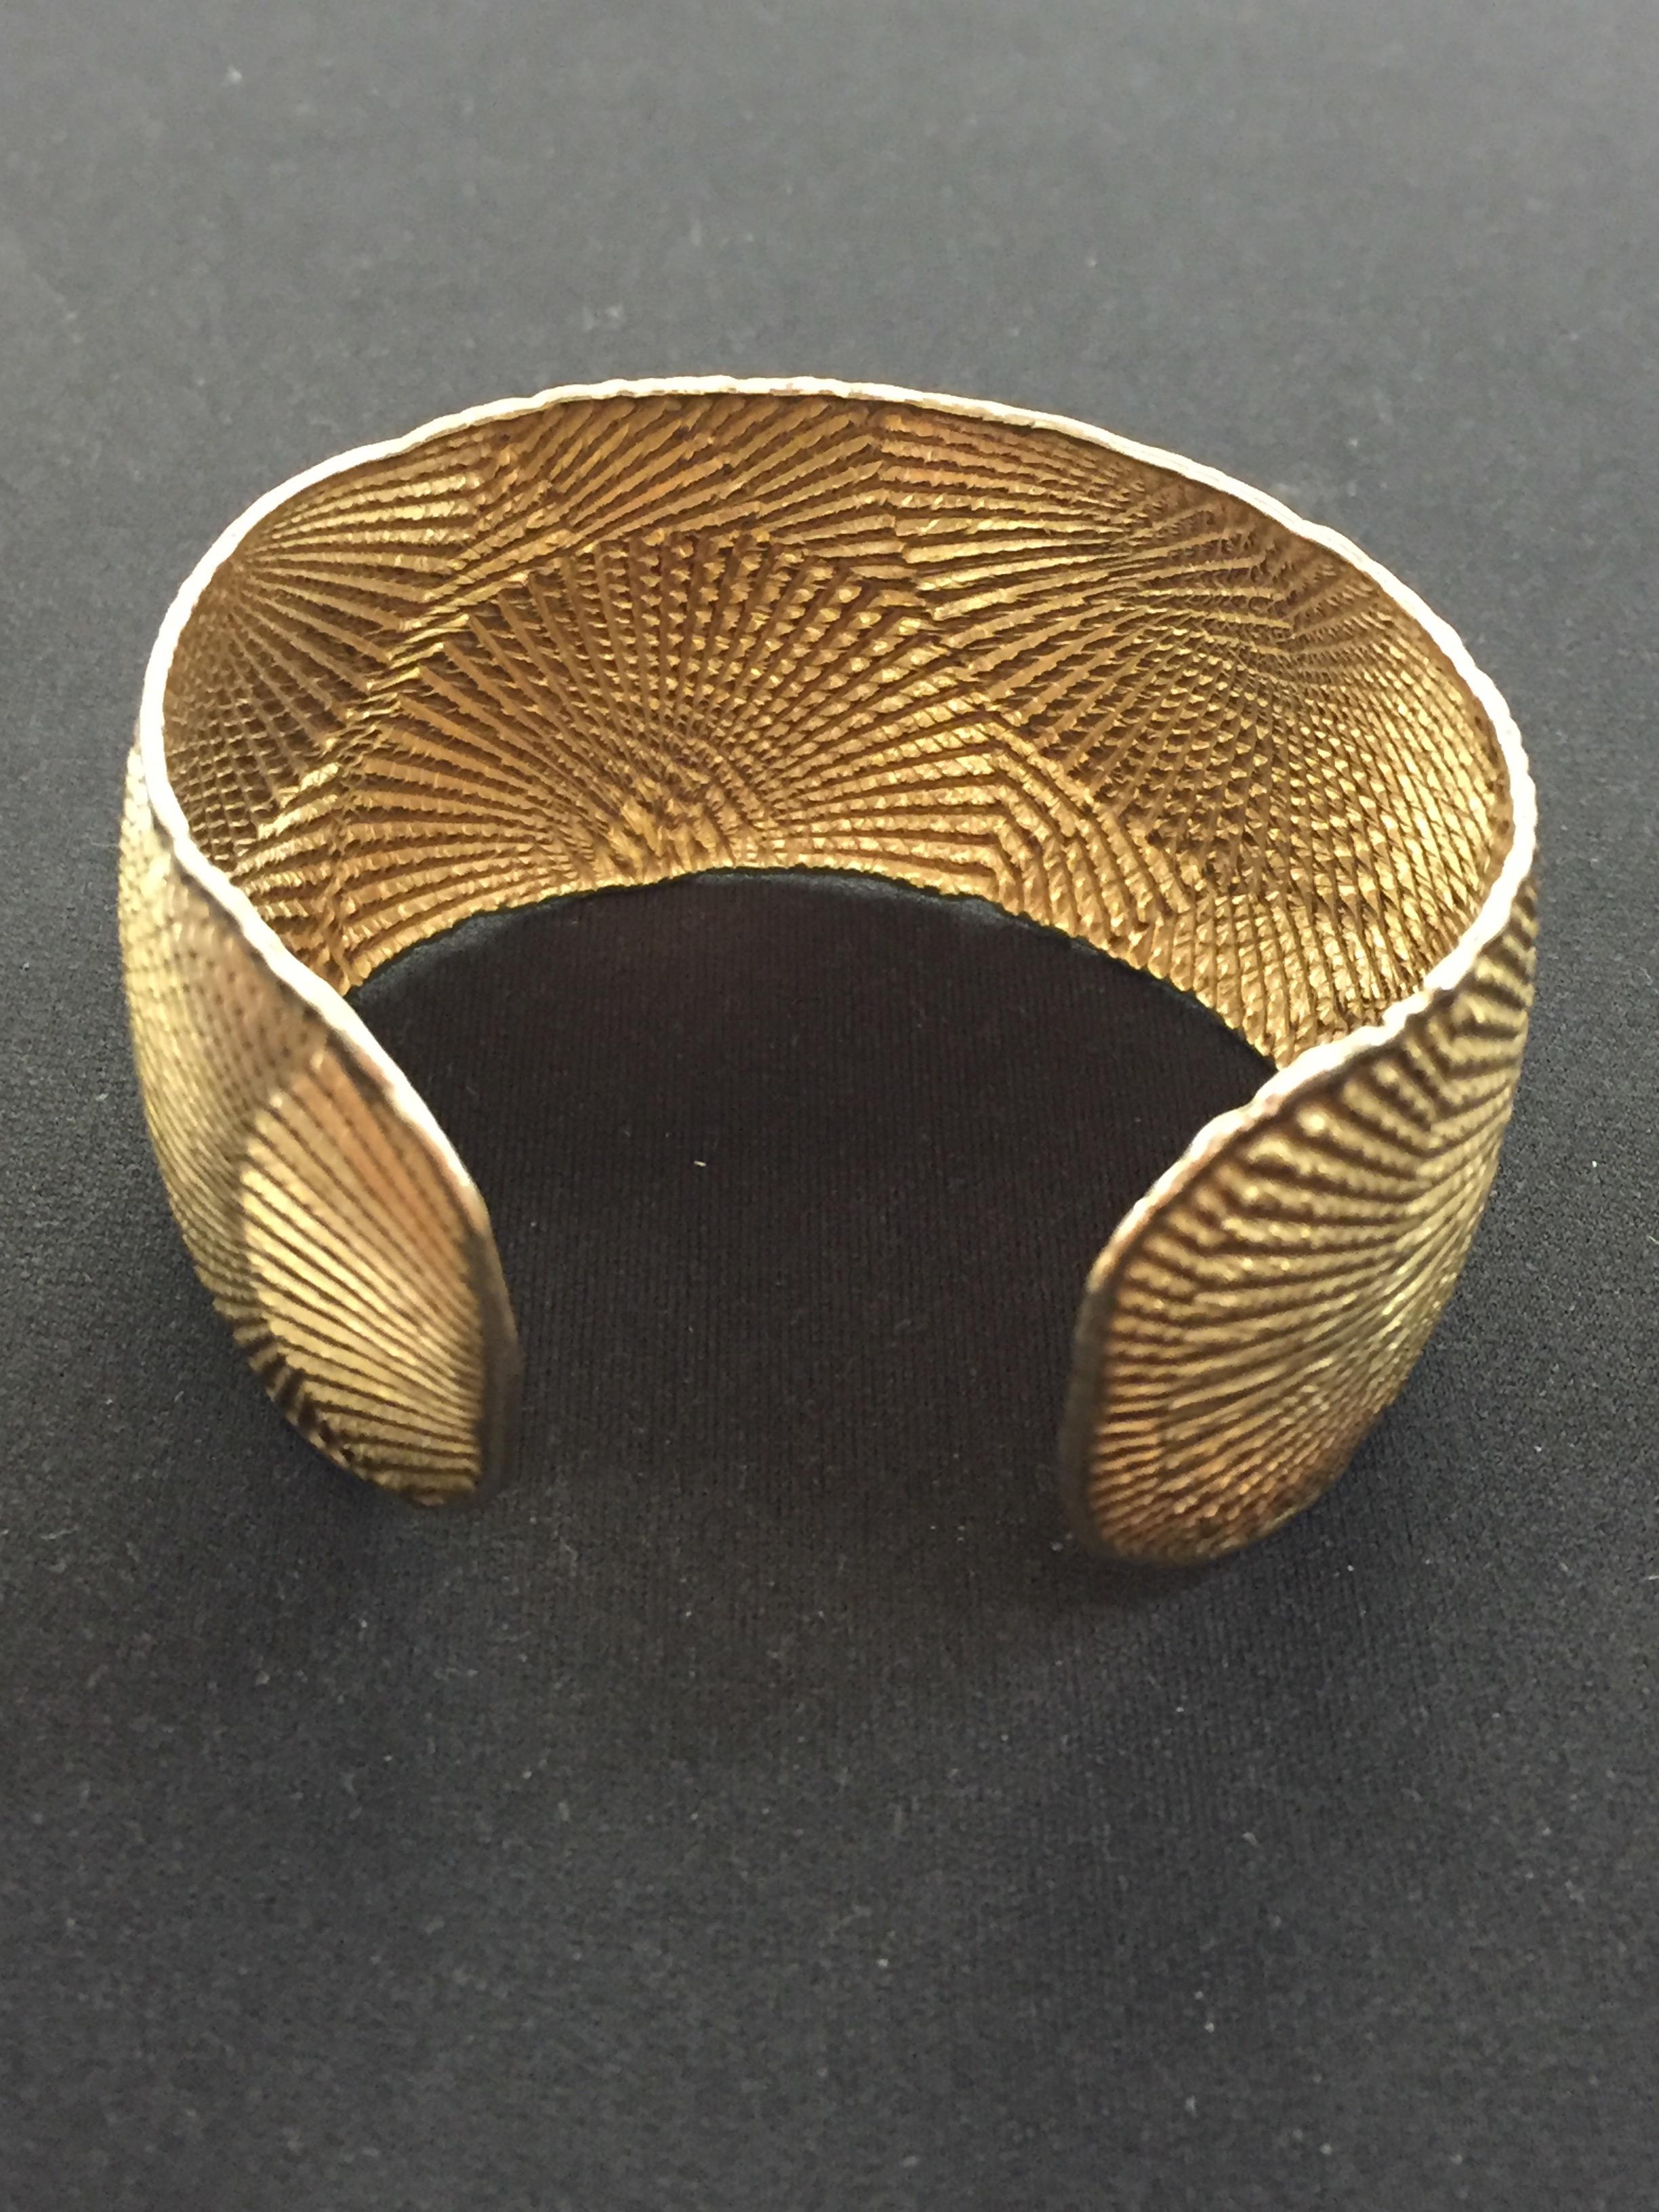 Italian Made Extra Large Gold-Tone Sterling Silver Cuff Bracelet